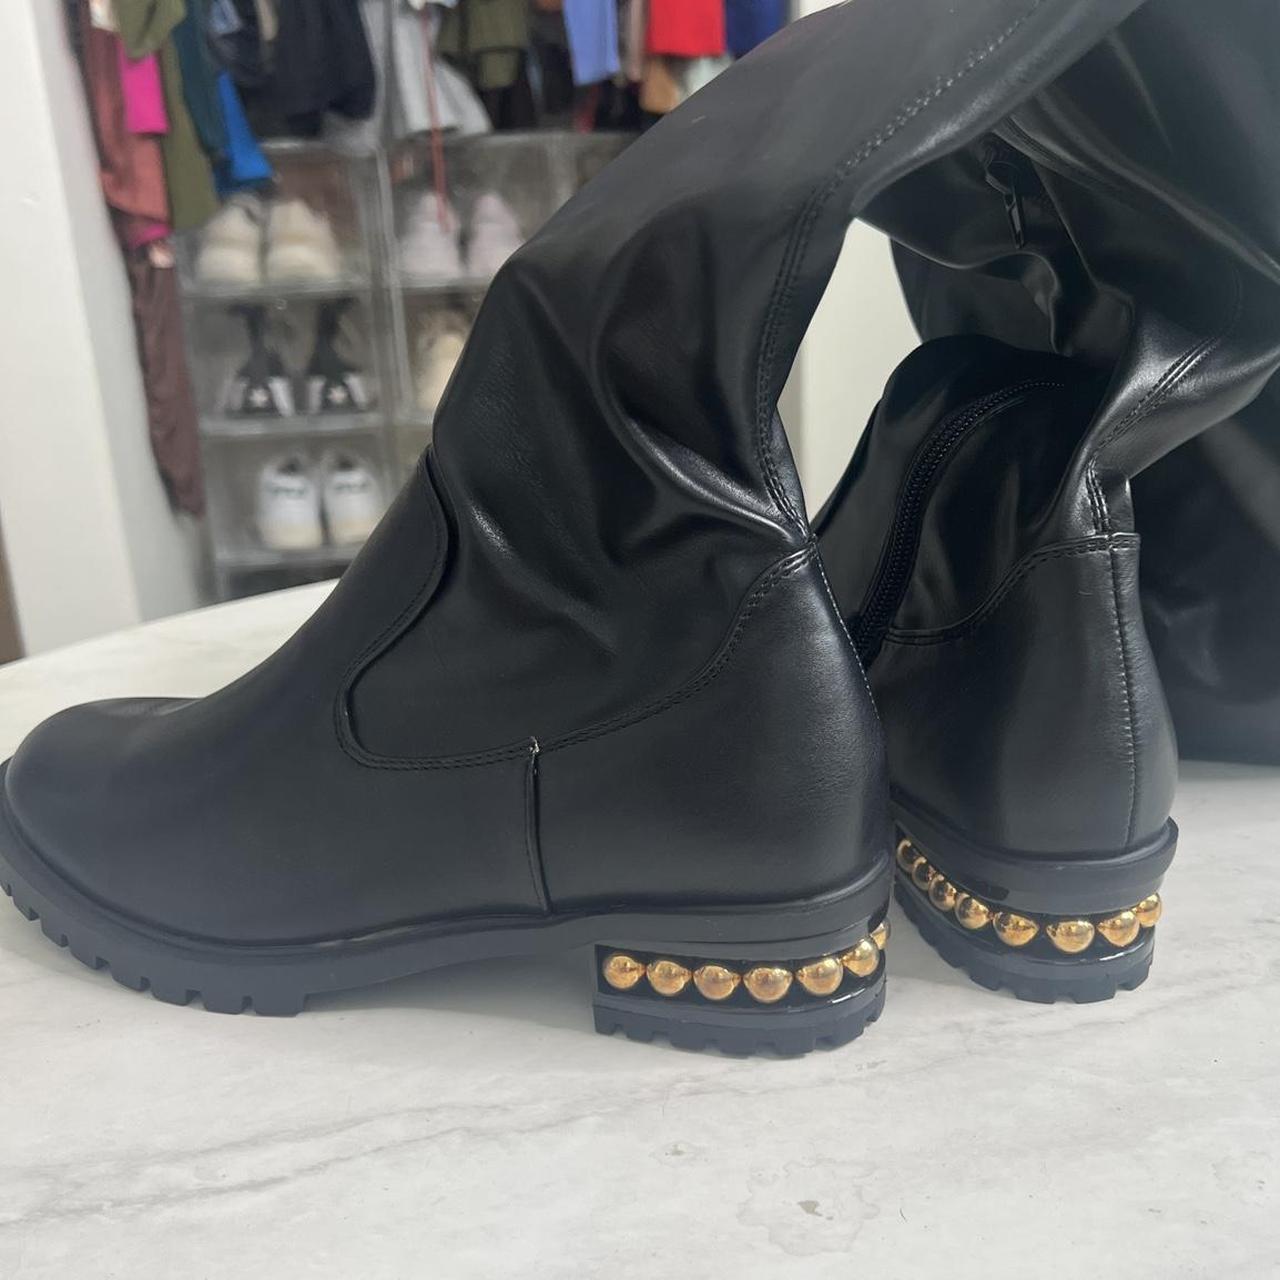 Women's Black and Gold Boots | Depop